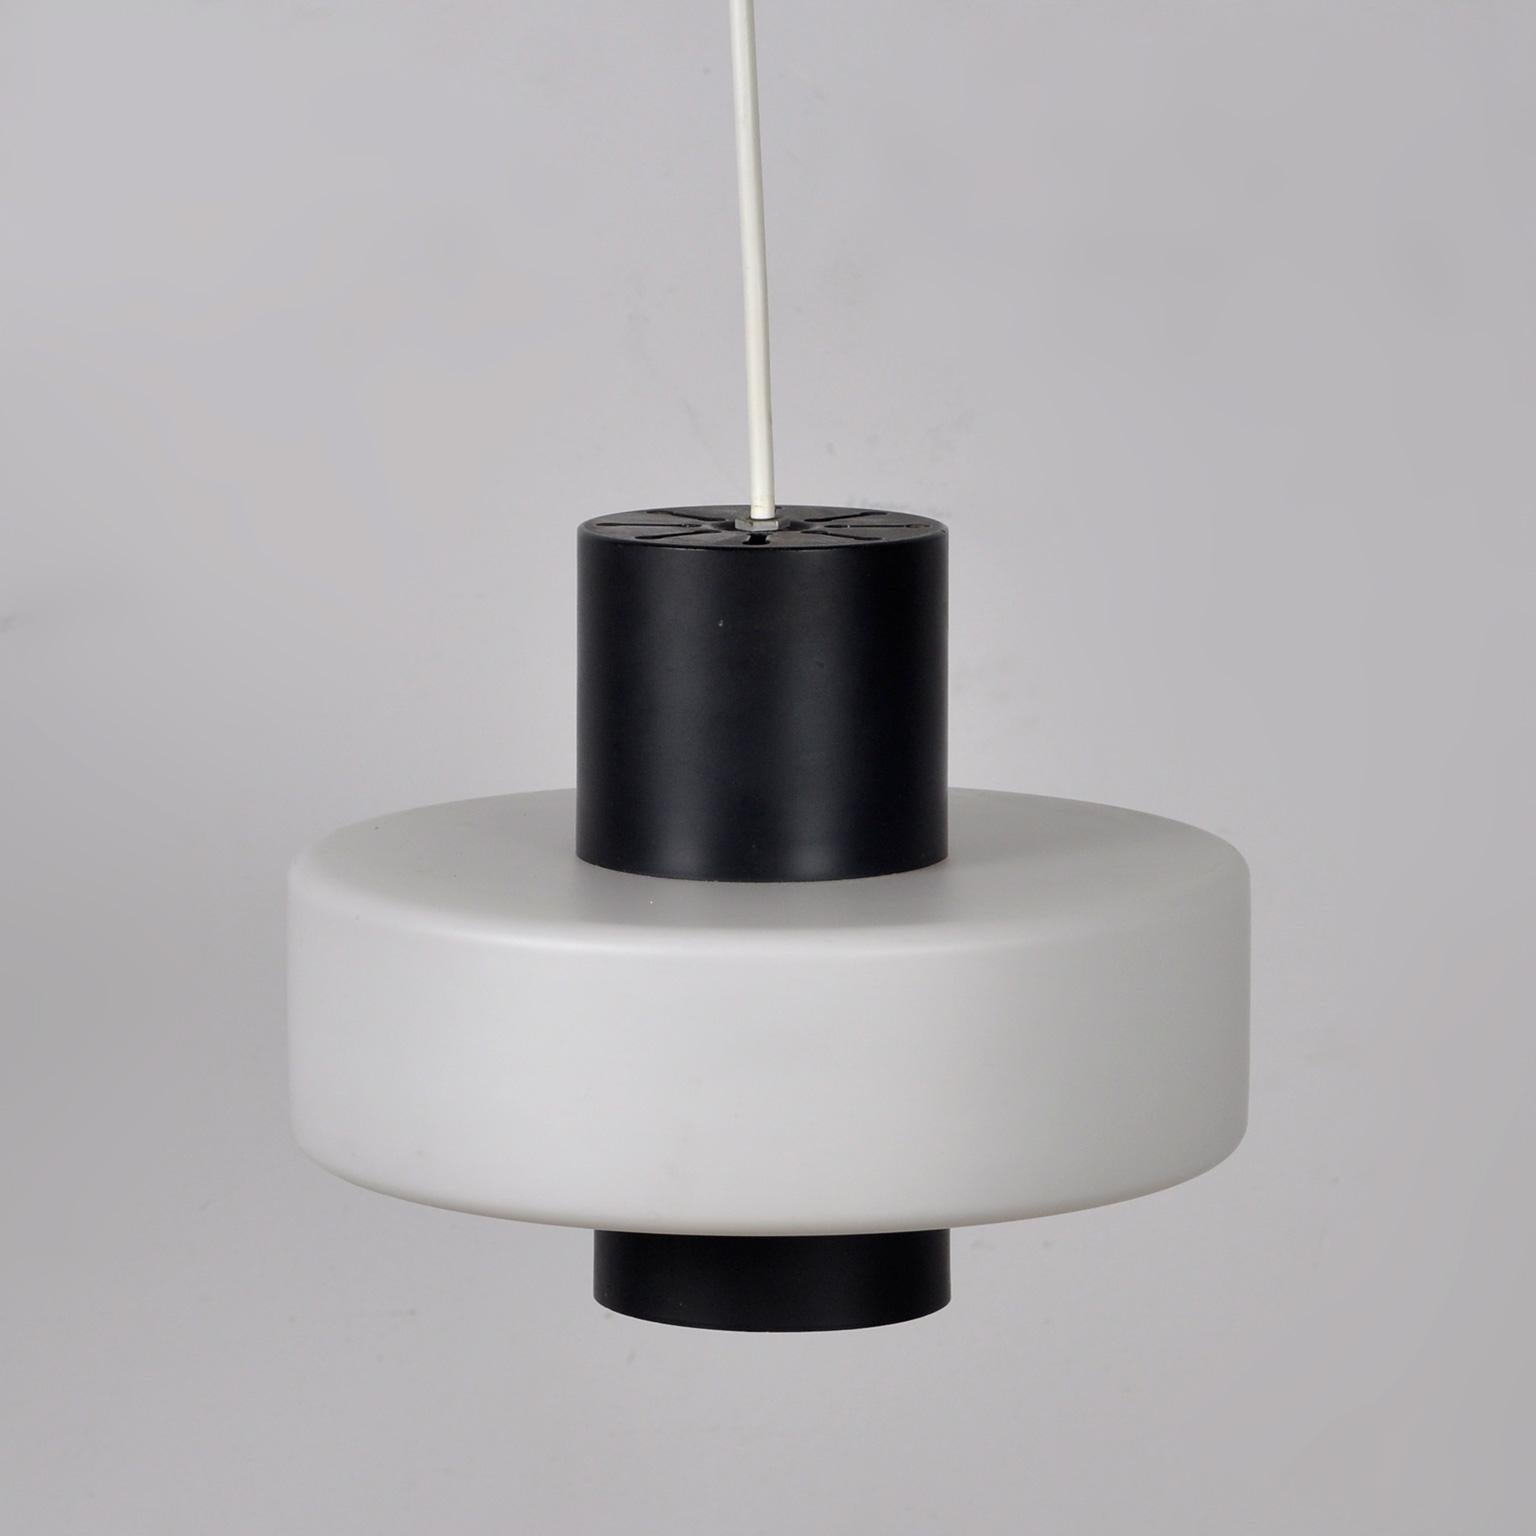 Hanging lamp from the Raak brand, produced in the 1960s. Made of metal and opal glass.